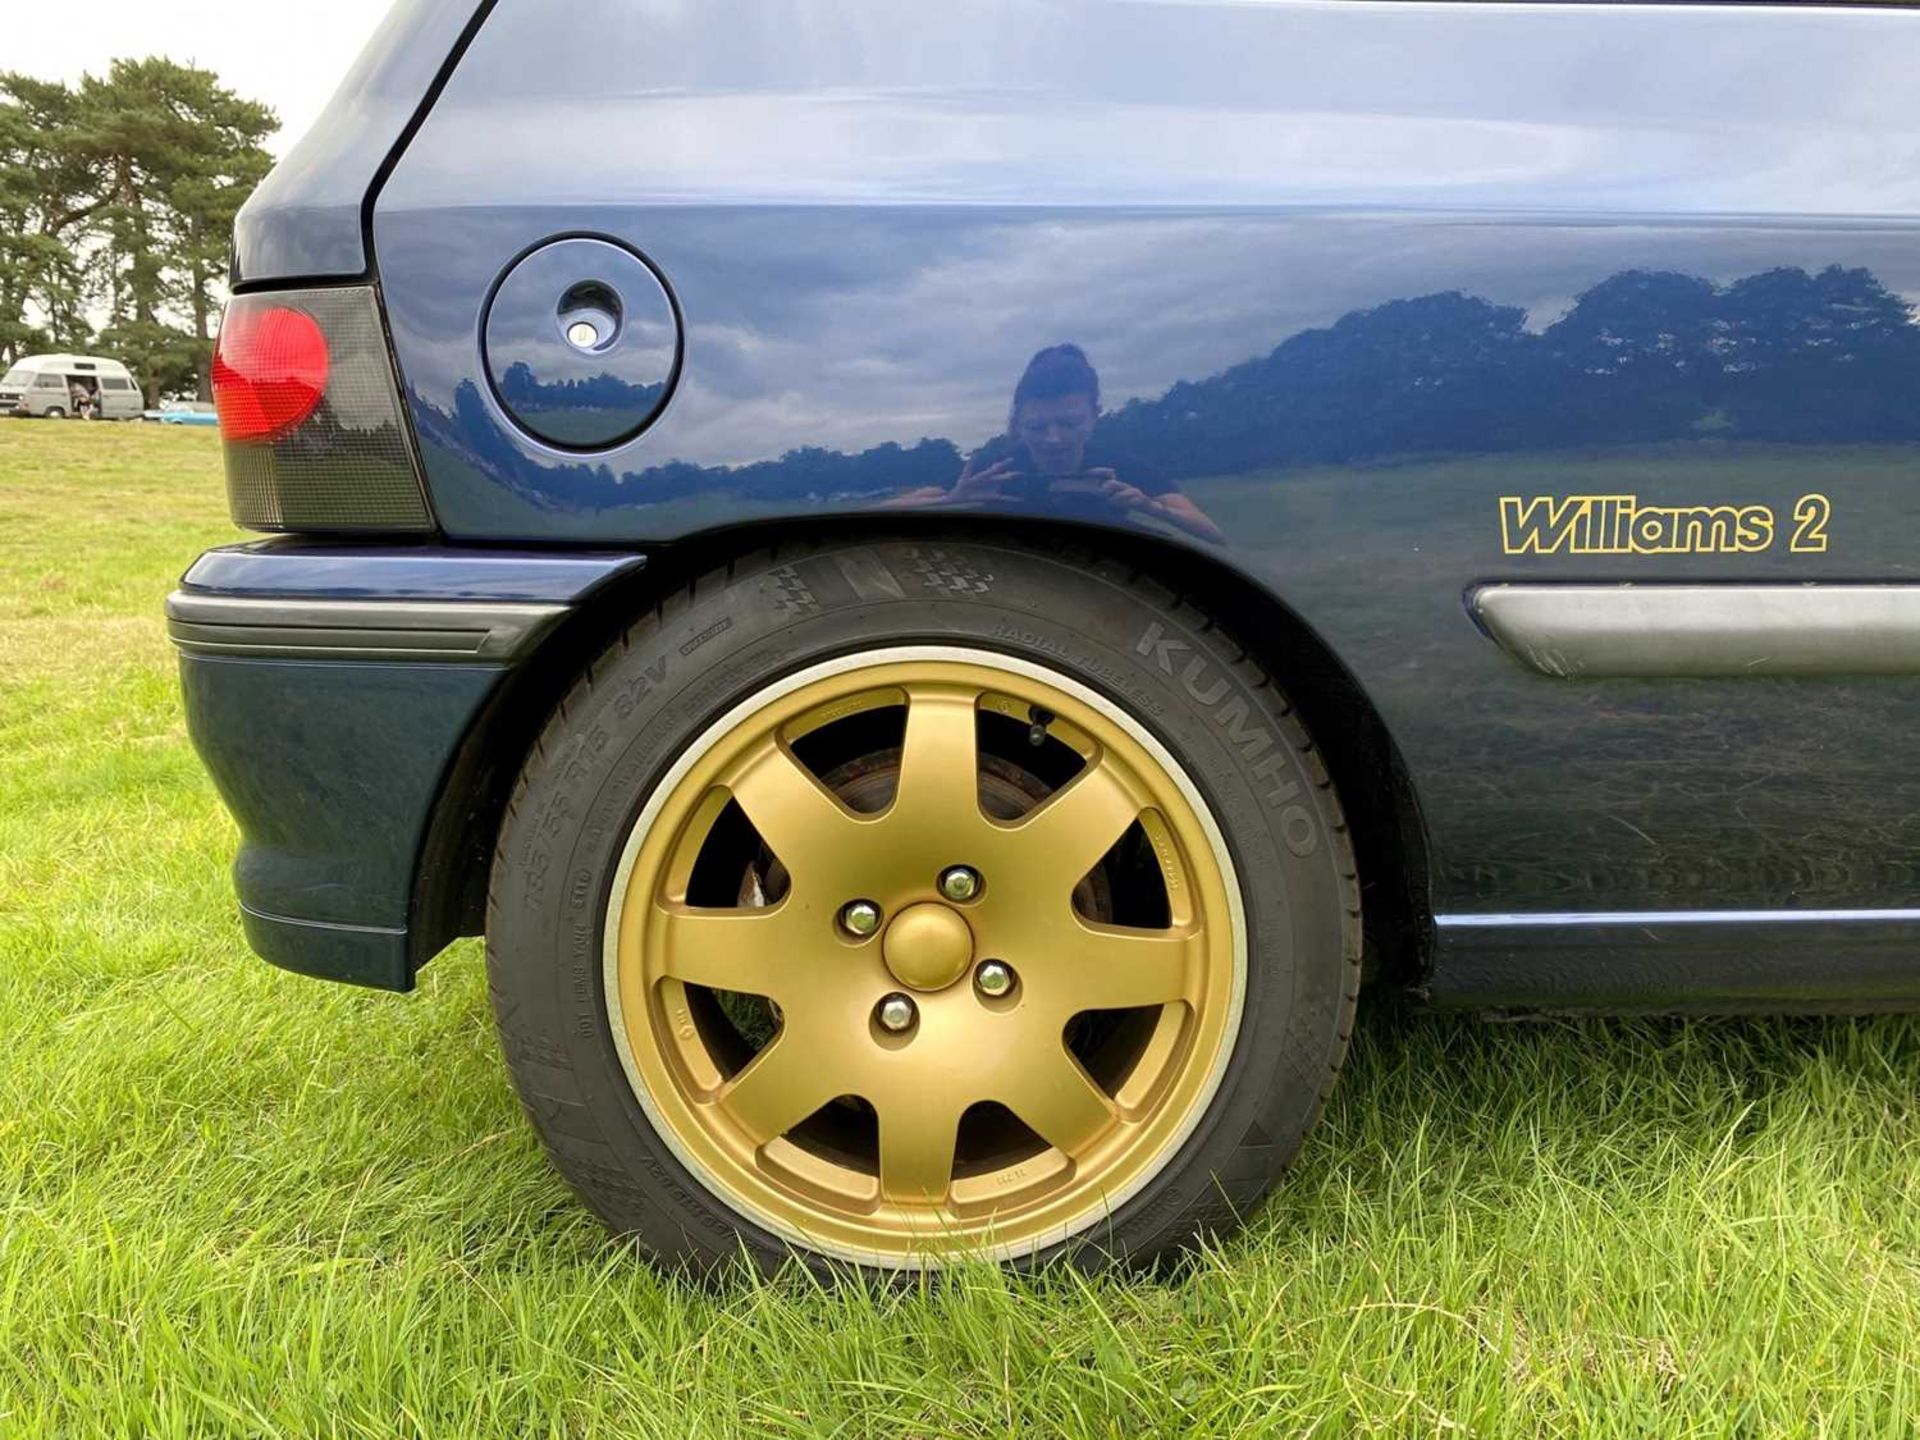 1995 Renault Clio Williams 2 UK-delivered, second series model and said to be one of just 482 produc - Image 50 of 66